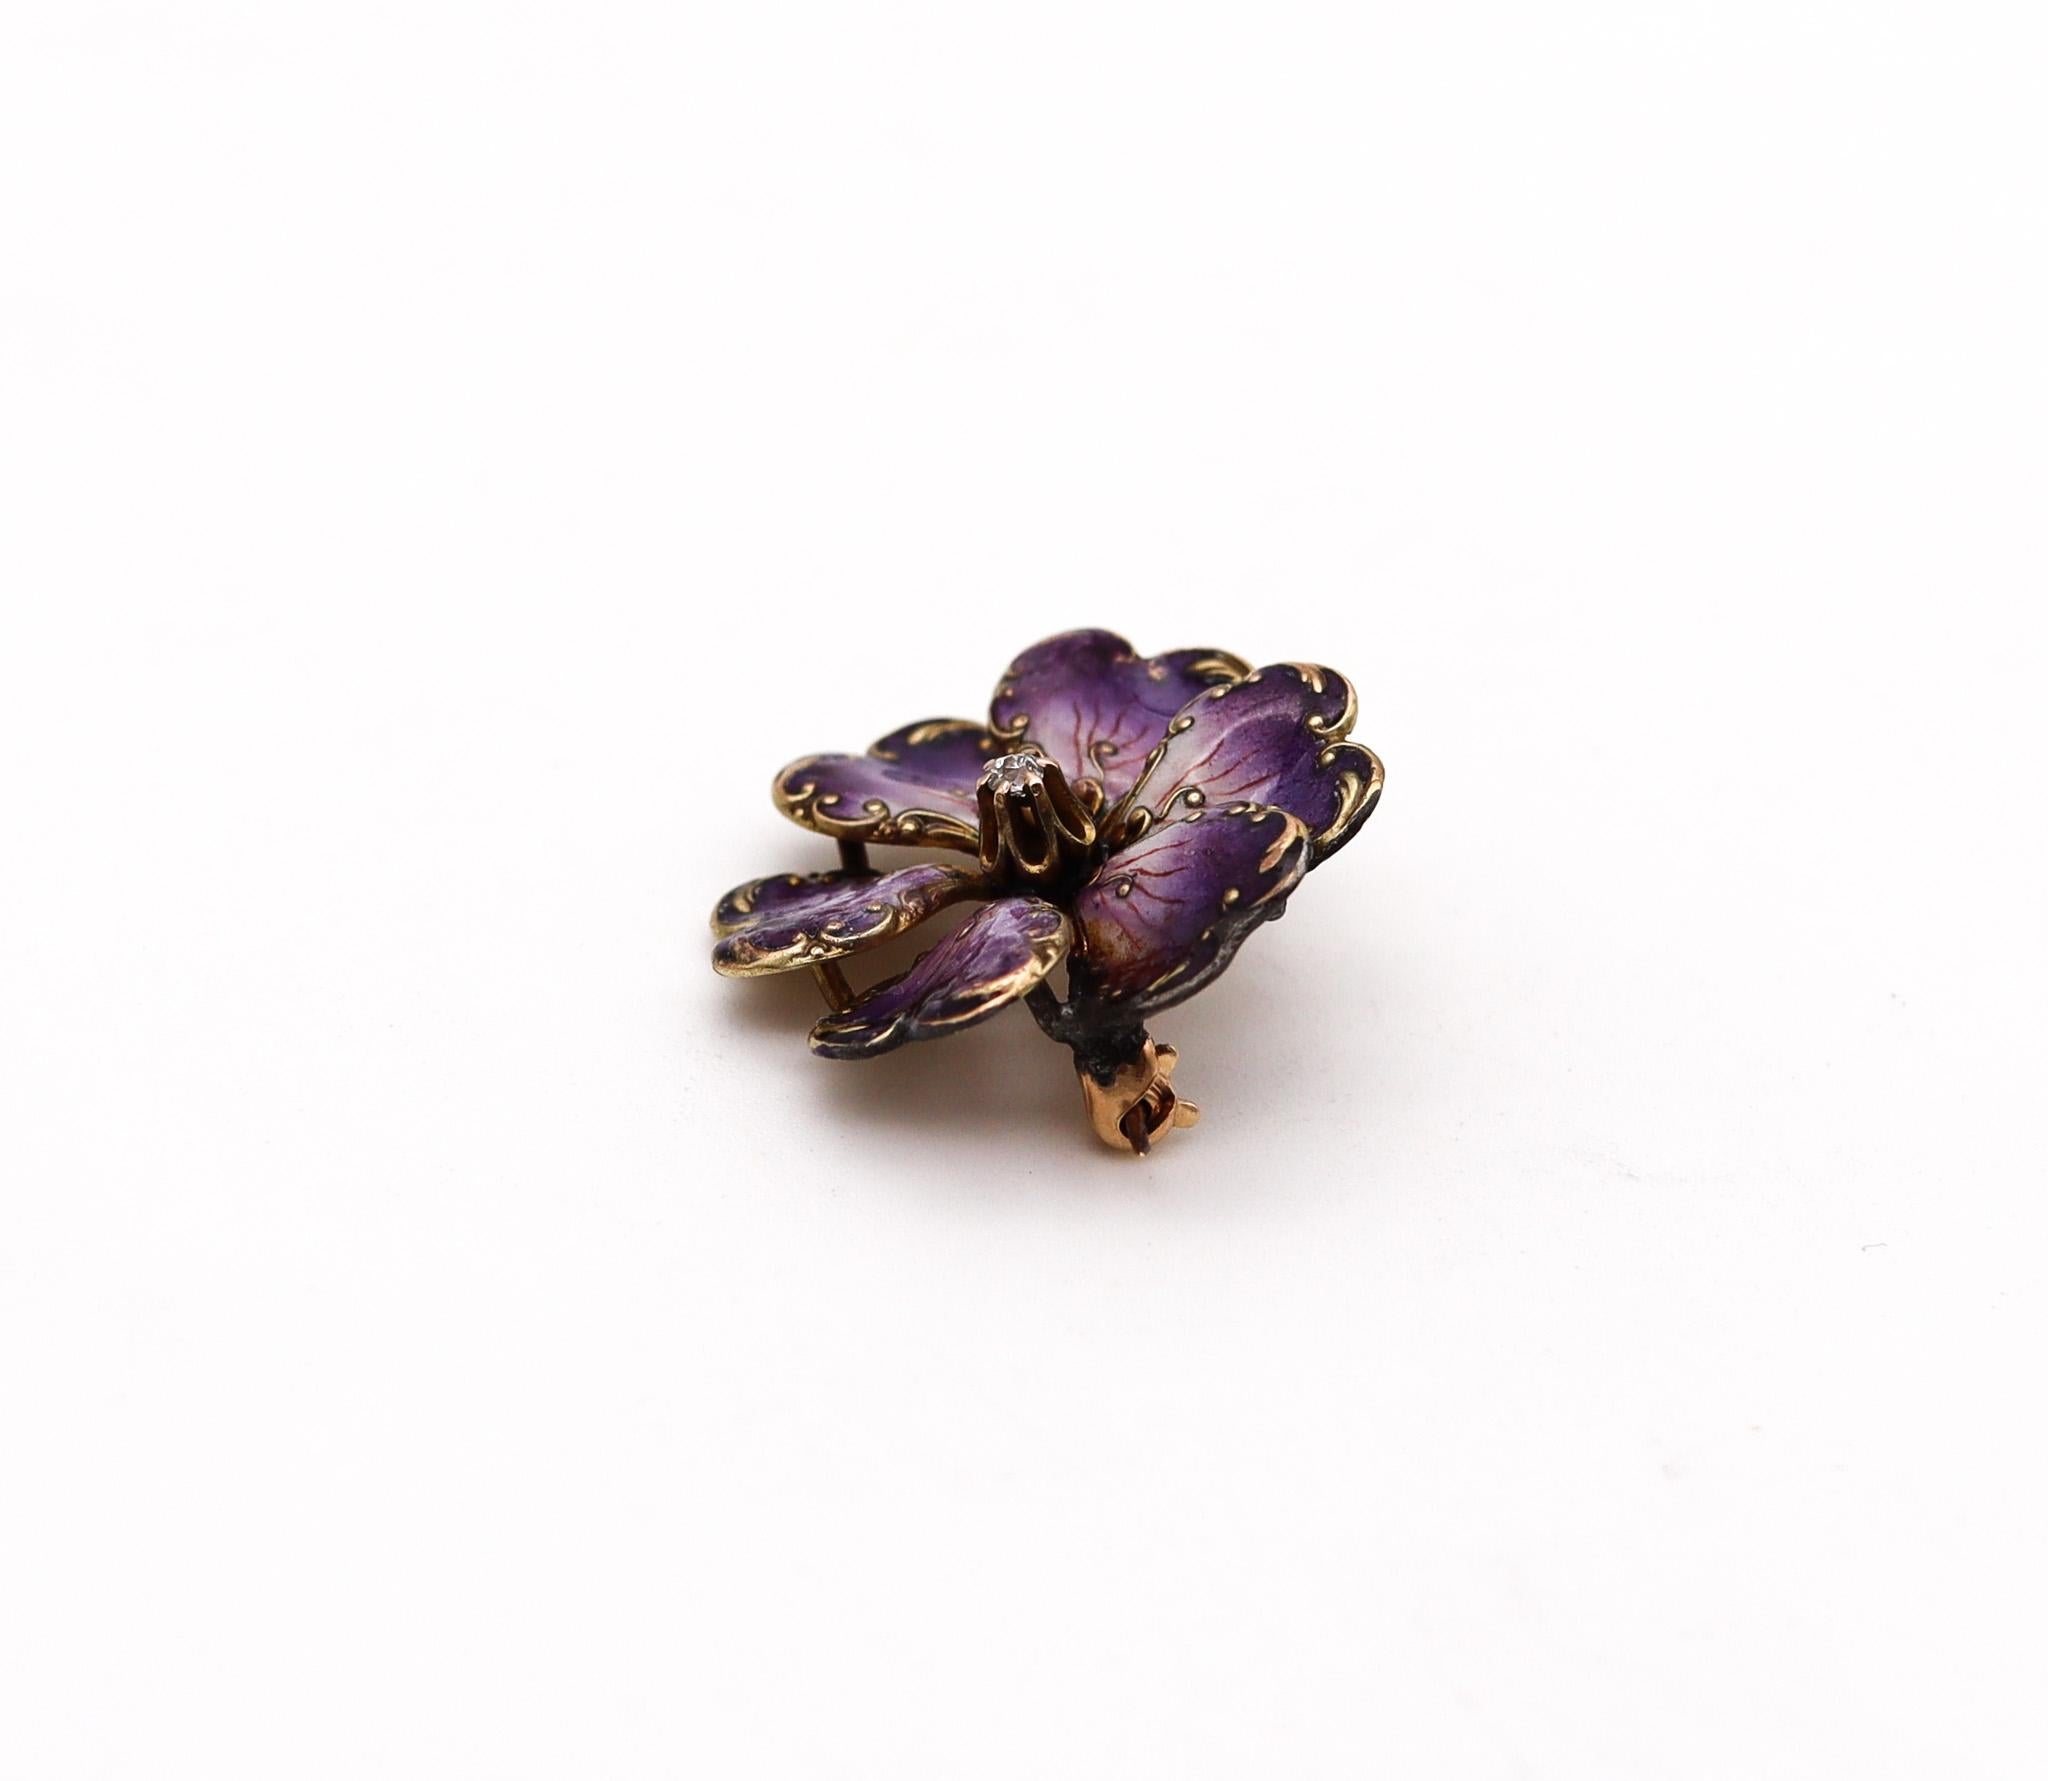 Art Nouveau 1905 Edwardian Enameled Purple Flower Brooch 14Kt Gold with Diamond In Excellent Condition For Sale In Miami, FL